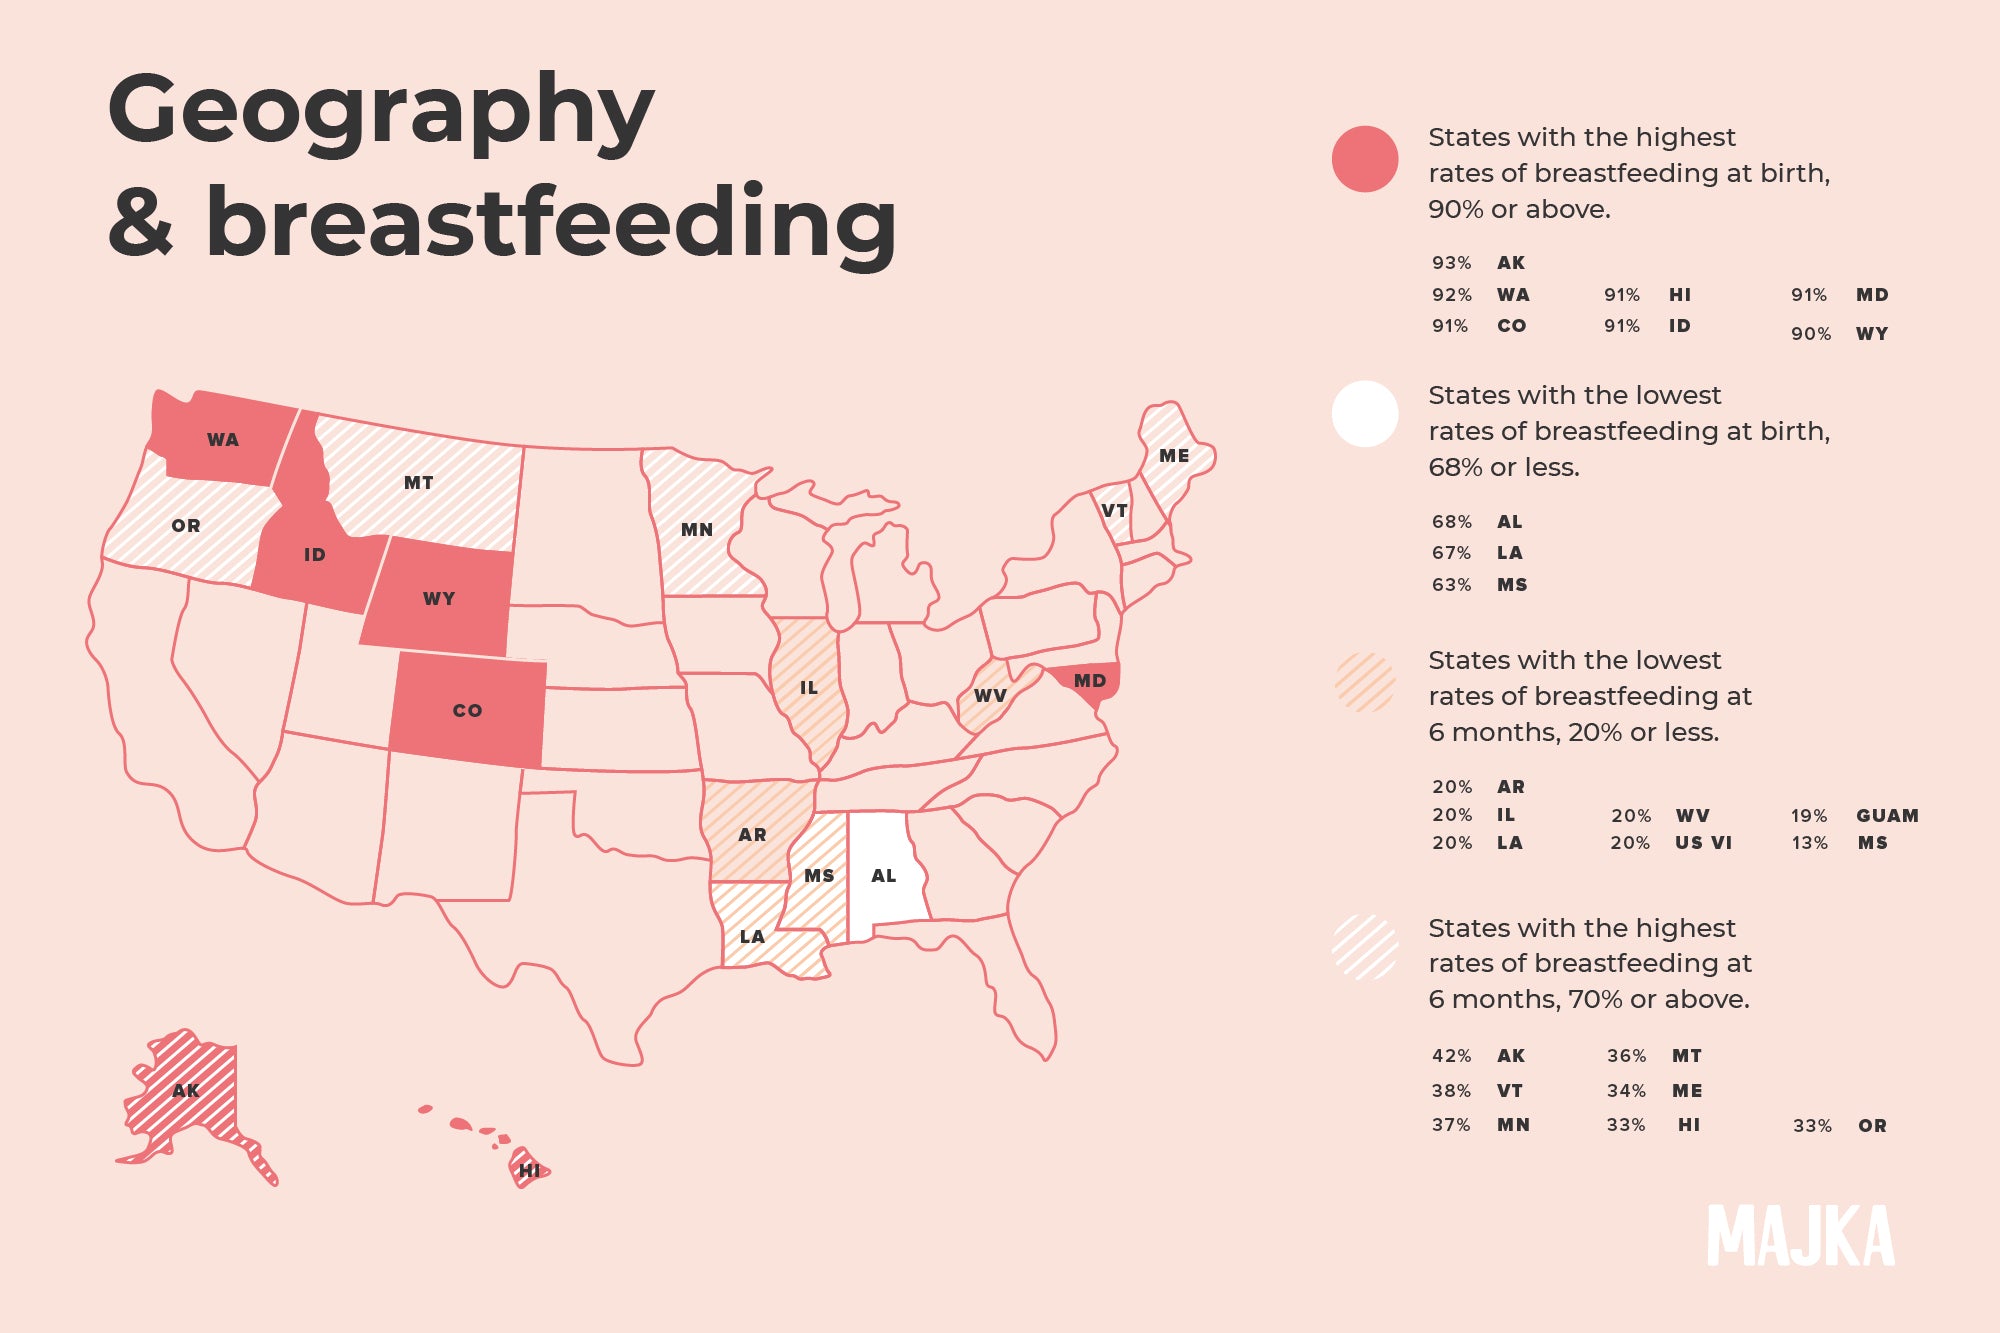 Geography & Breastfeeding in the USA